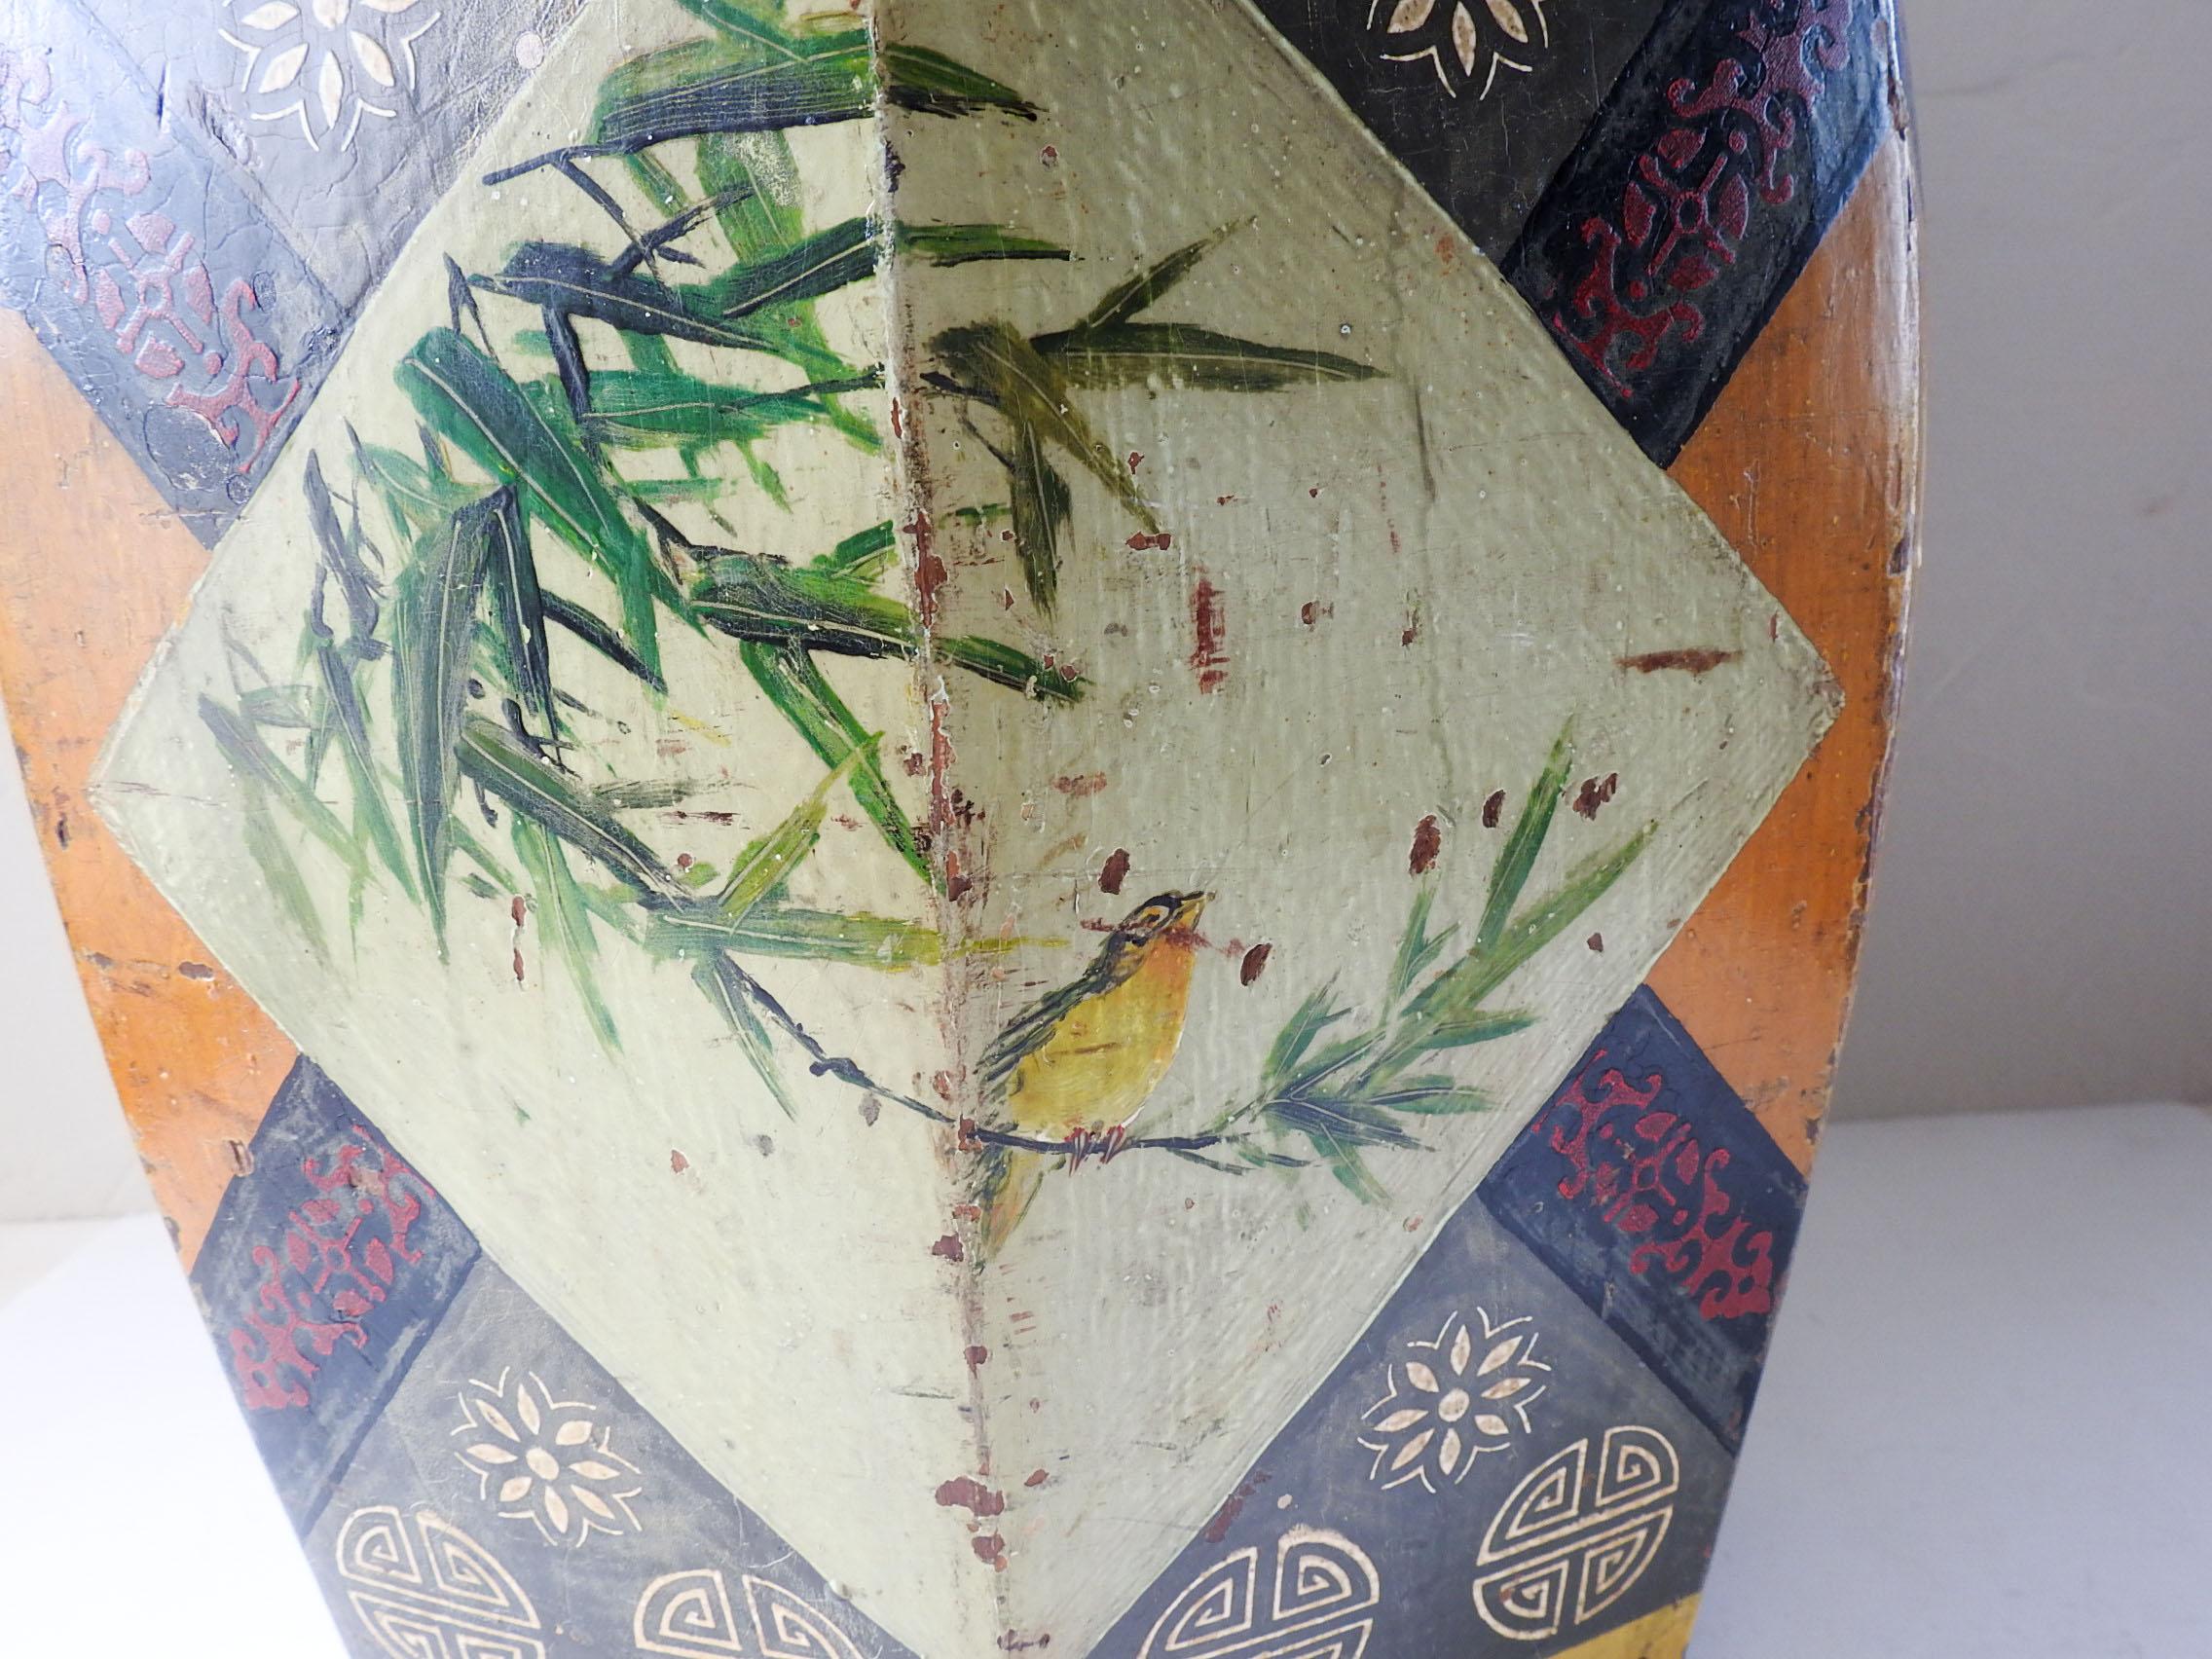 Vintage Chinese hand painted wood garden style seat, stool or barrel with lid. Birds, botanical and pastoral scenes. Overall wear to paint, clean inside.